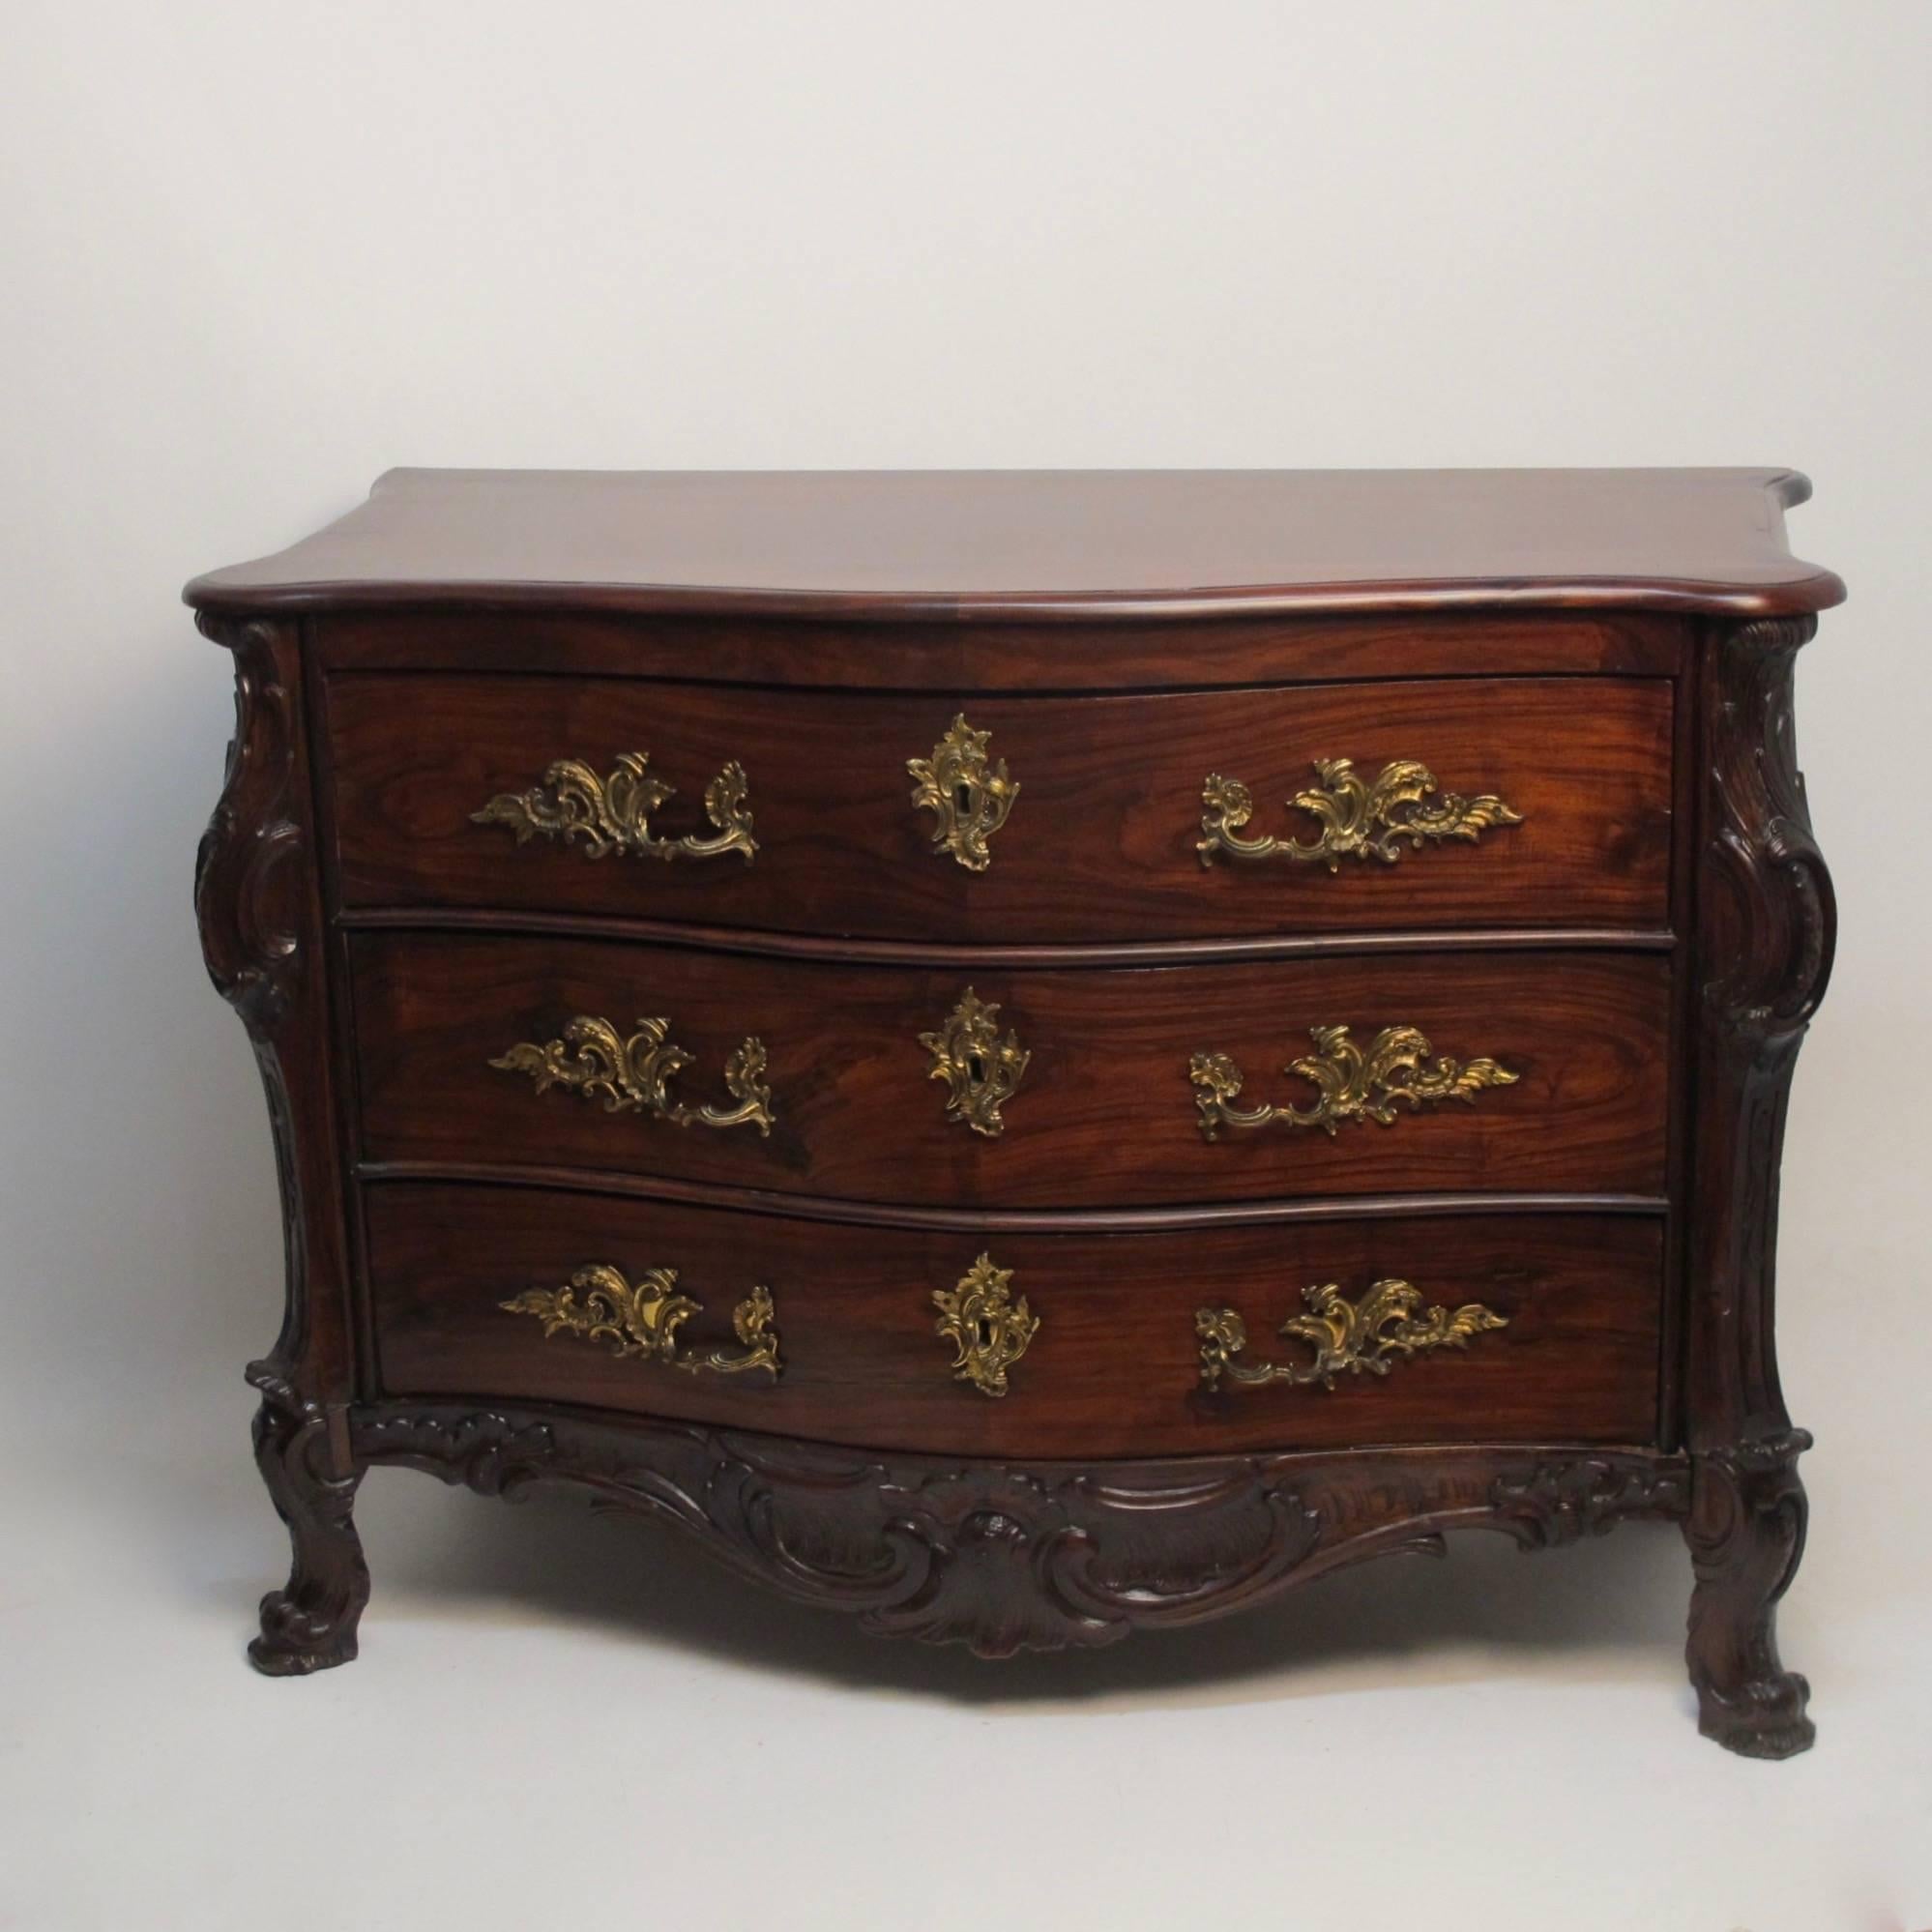 Beautifully carved solid rosewood three-drawer chest of drawers. Having original hardware and in remarkable original condition with some expected old minor repairs. Portugal, late 18th century/early 19th century.